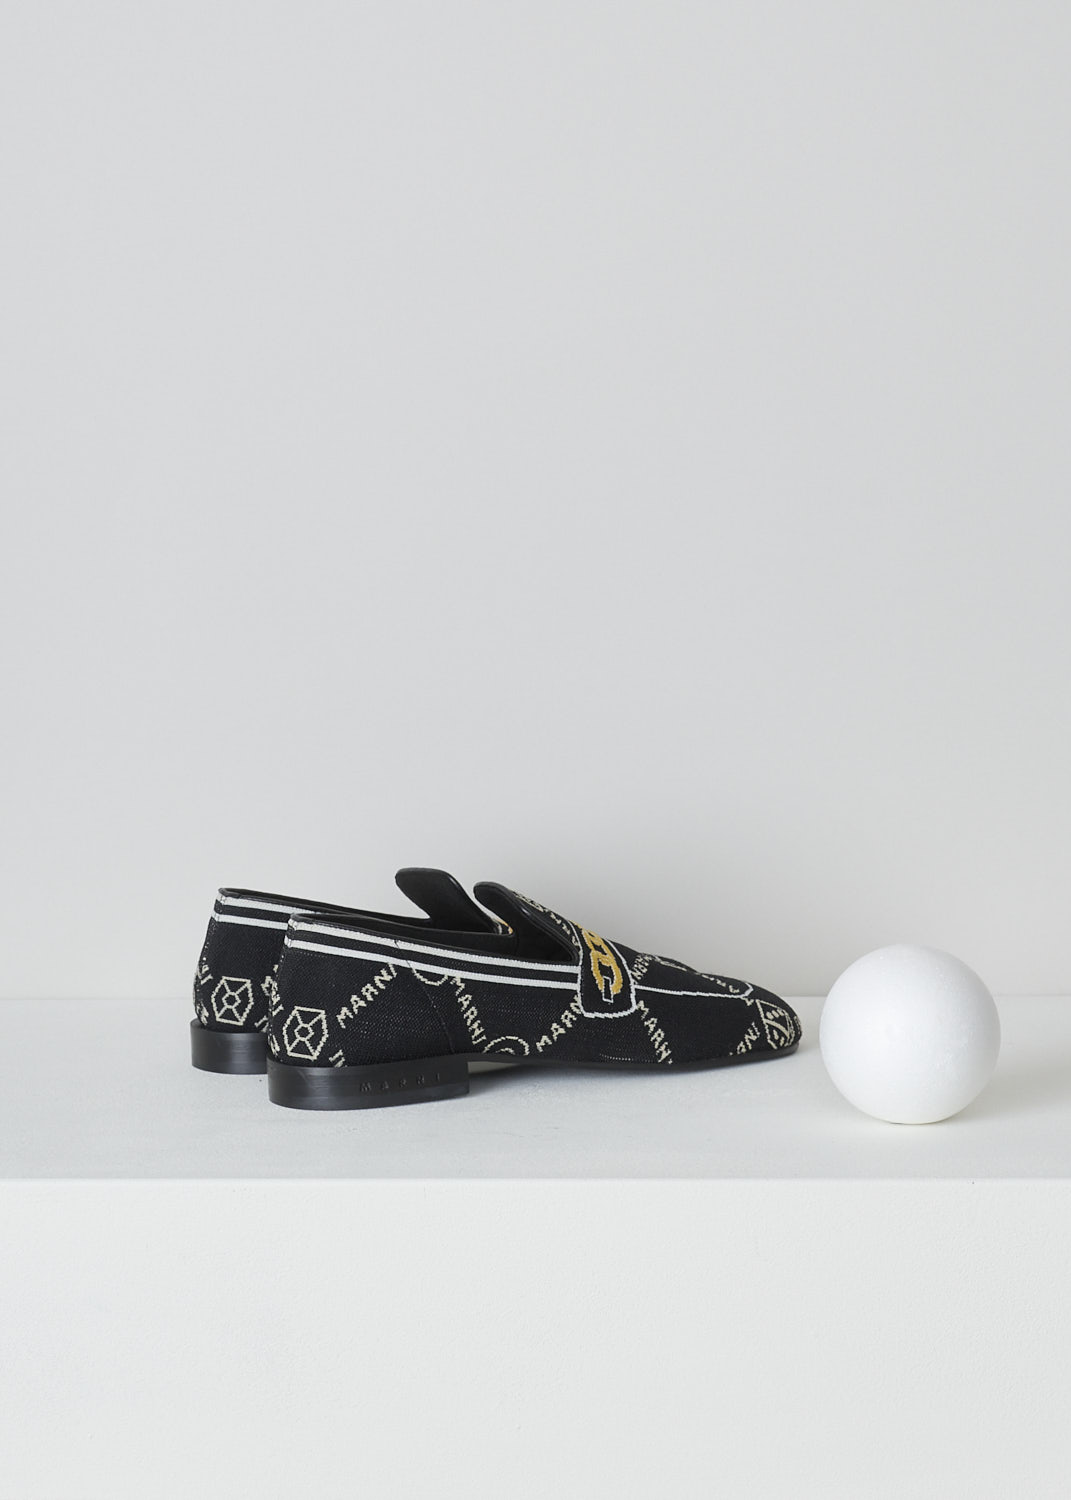 MARNI, BLACK TROMPE L'OEIL JACQUARD MOCCASINS, MOMS003601_P4601_Z2Q23, Black, Back, These black knitted moccasins have a trompe l'oeil image woven into them which depicts a gold chain across the vamp. The brand's logo is woven into them throughout the shoe in white. These moccasins have a round toe and flat rubber sole with a small heel. 
